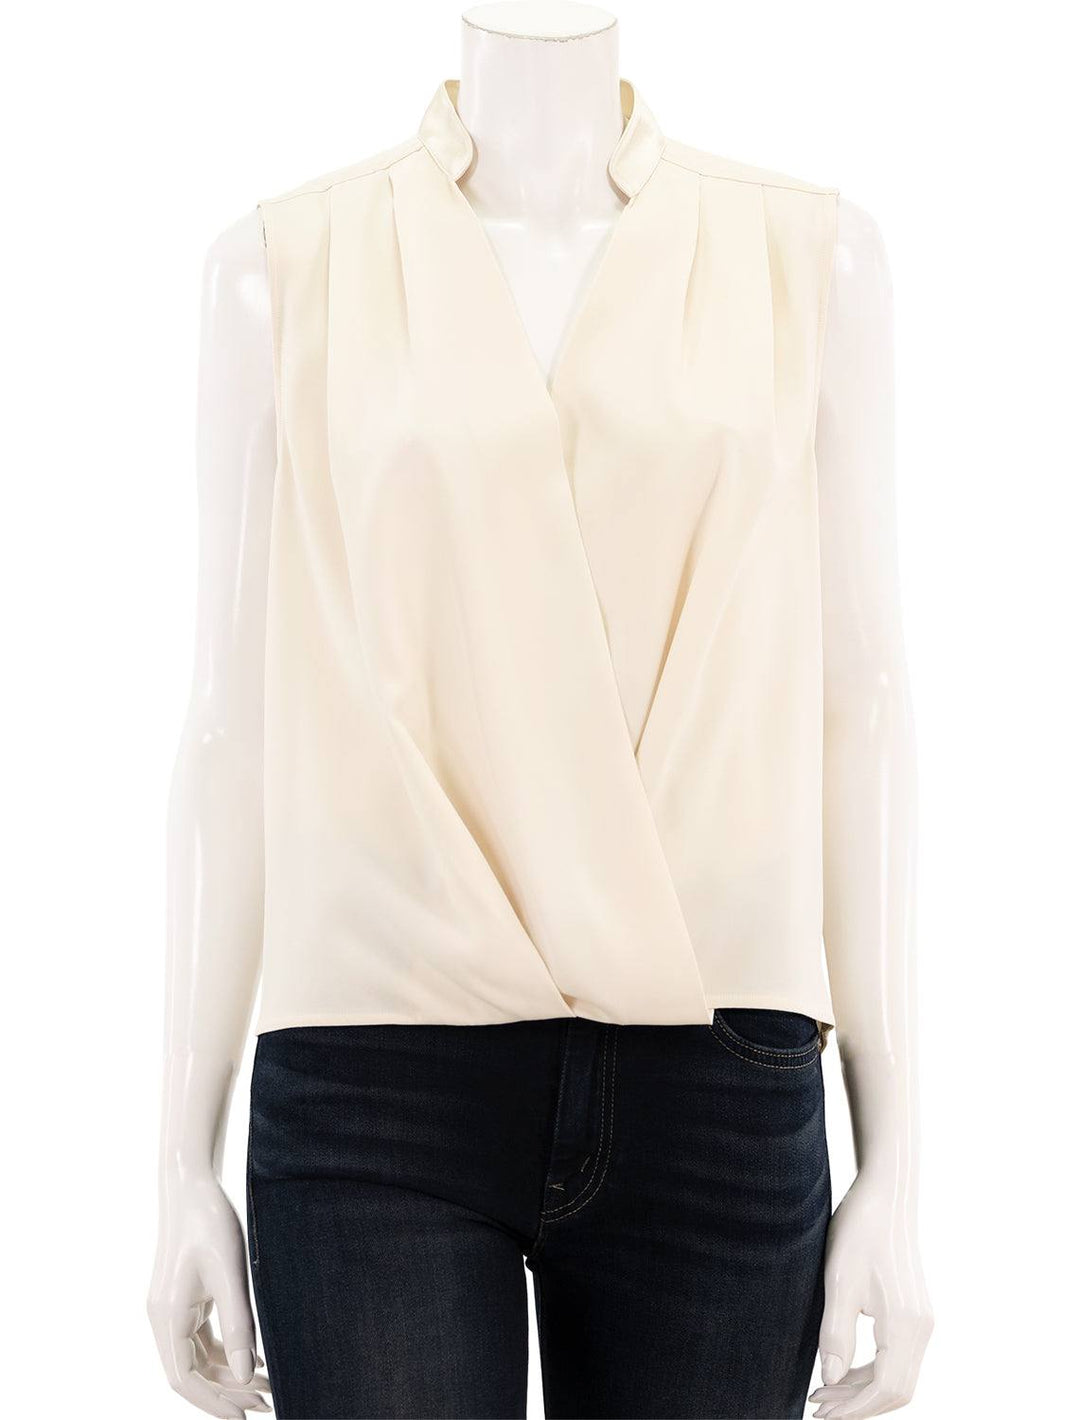 Front view of Rag & Bone's meredith top in ivory.